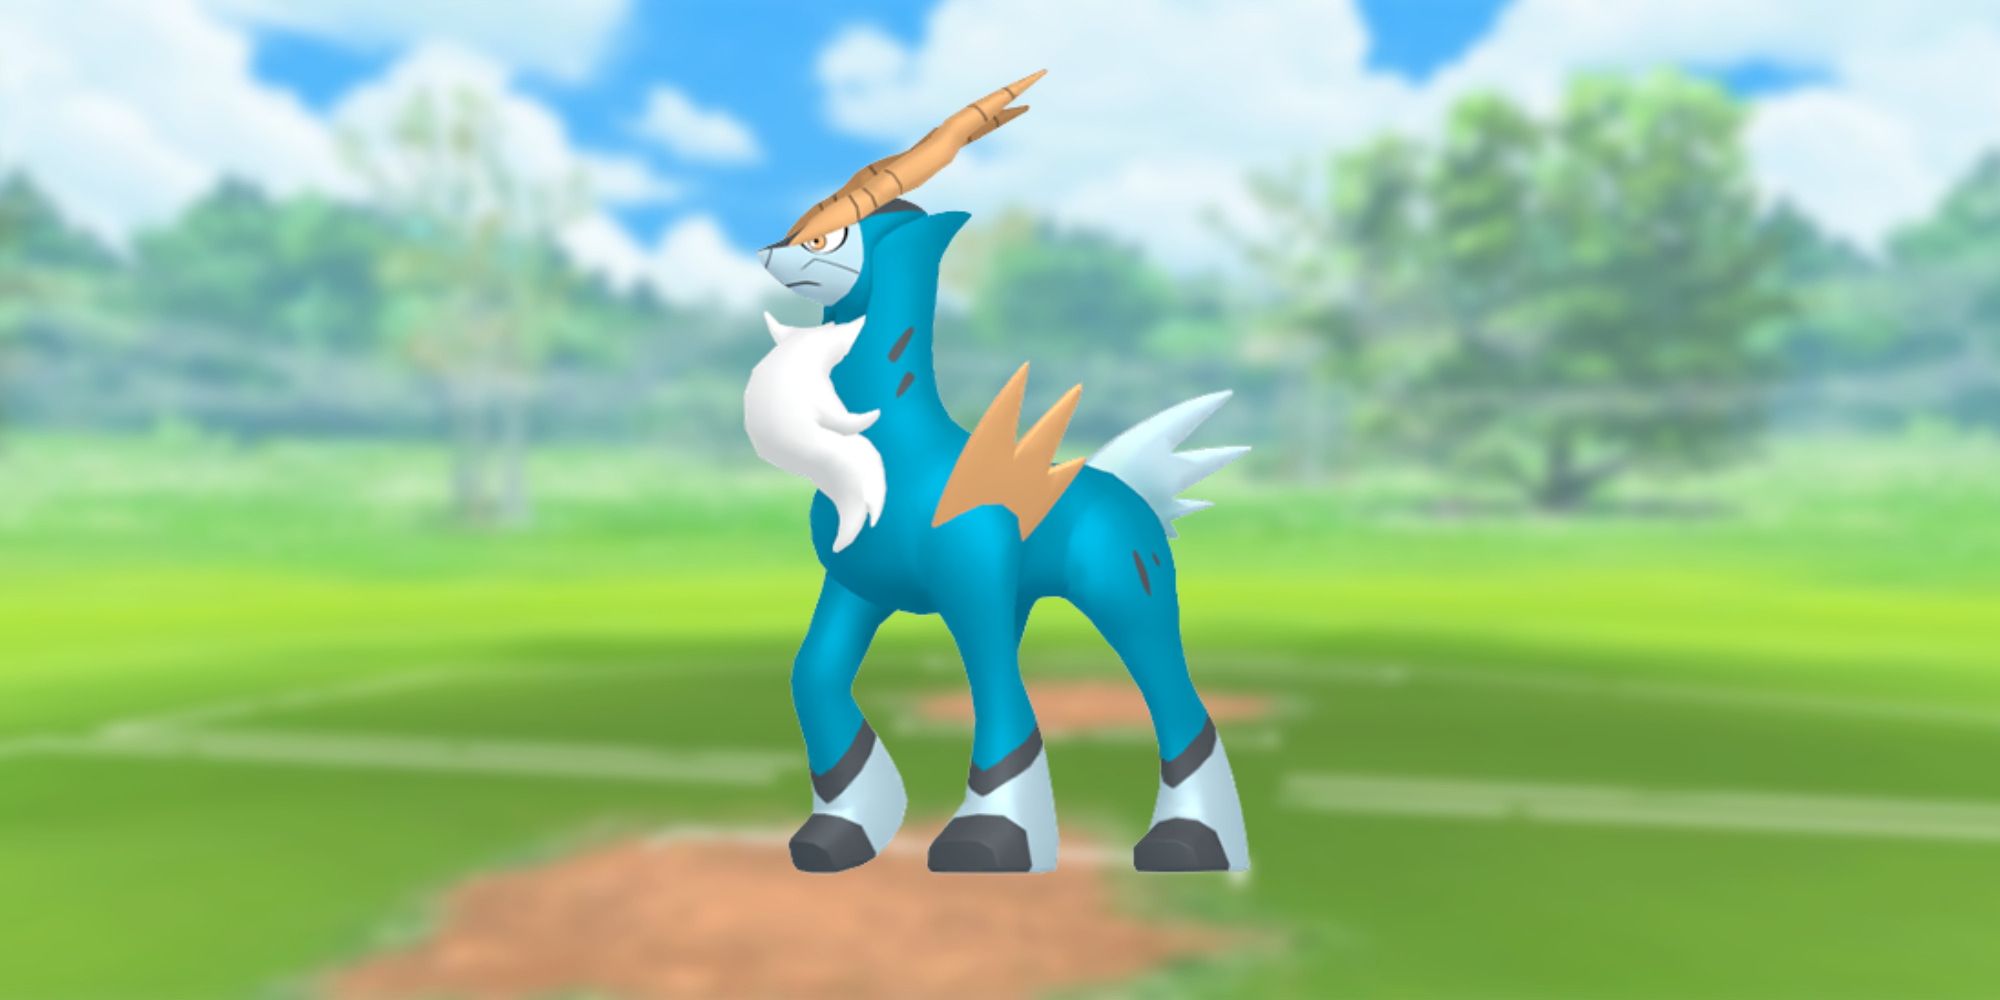 Cobalion from Pokemon with the Pokemon Go battlefield as the background